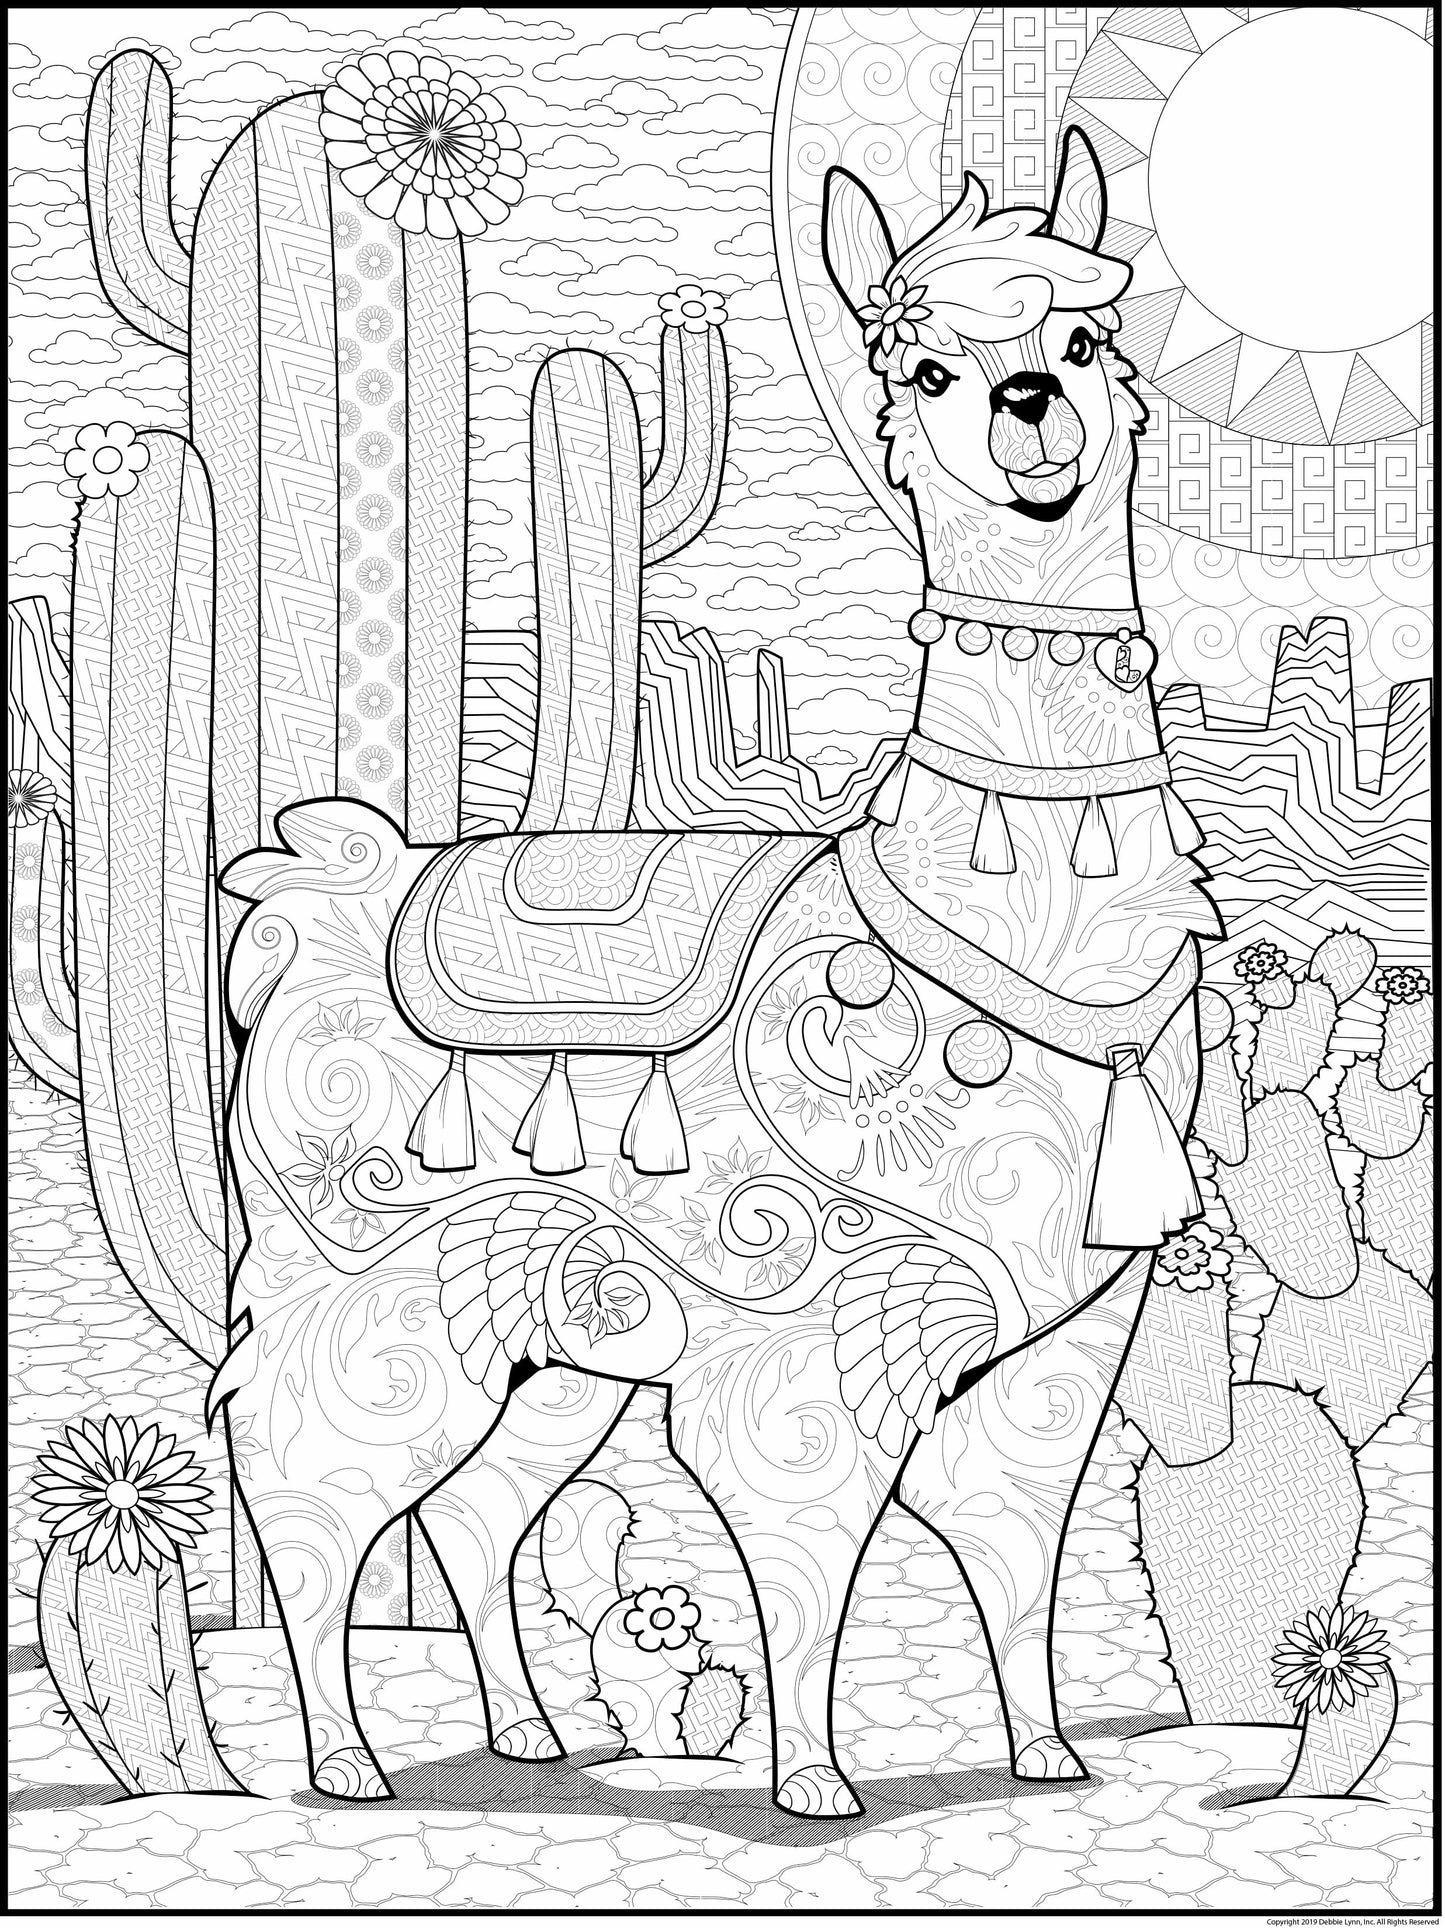 Llama Personalized Giant Coloring Poster 46"x60"